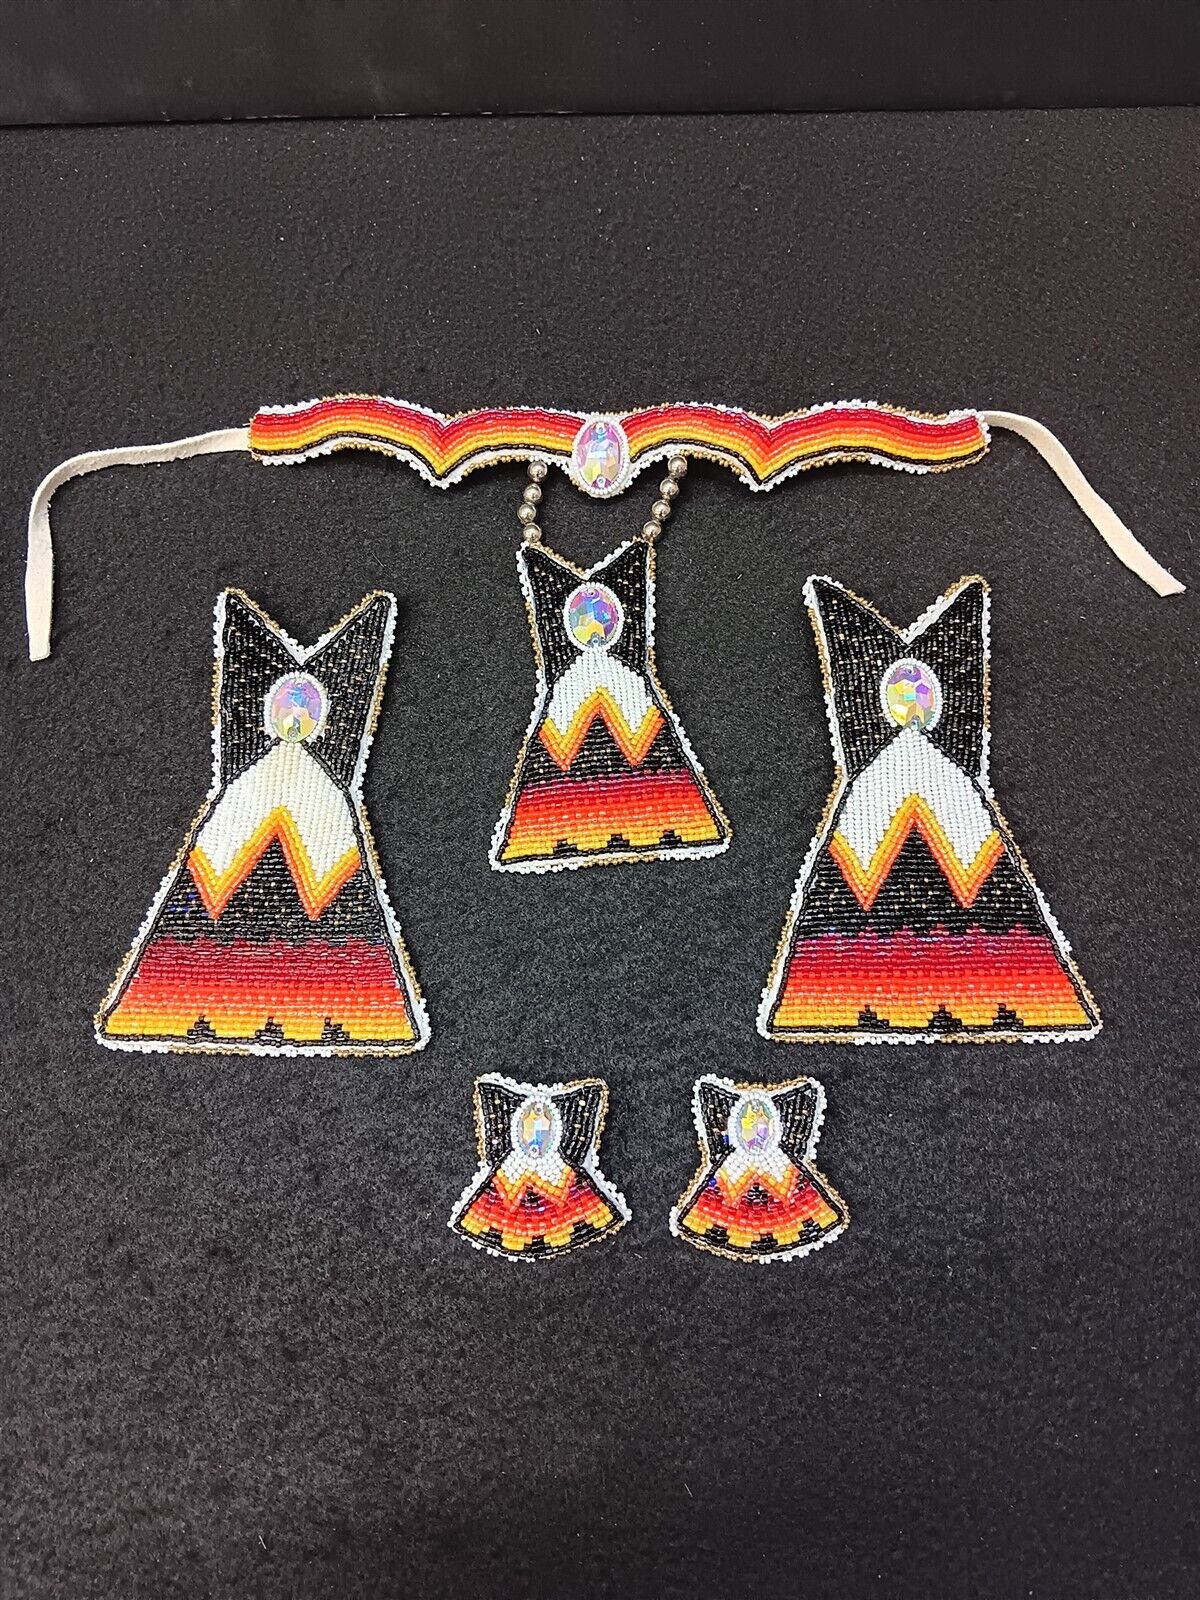 NICE 5 PIECE HAND CRAFTED CUT BEADED TIPI DESIGN NATIVE AMERICAN INDIAN SET